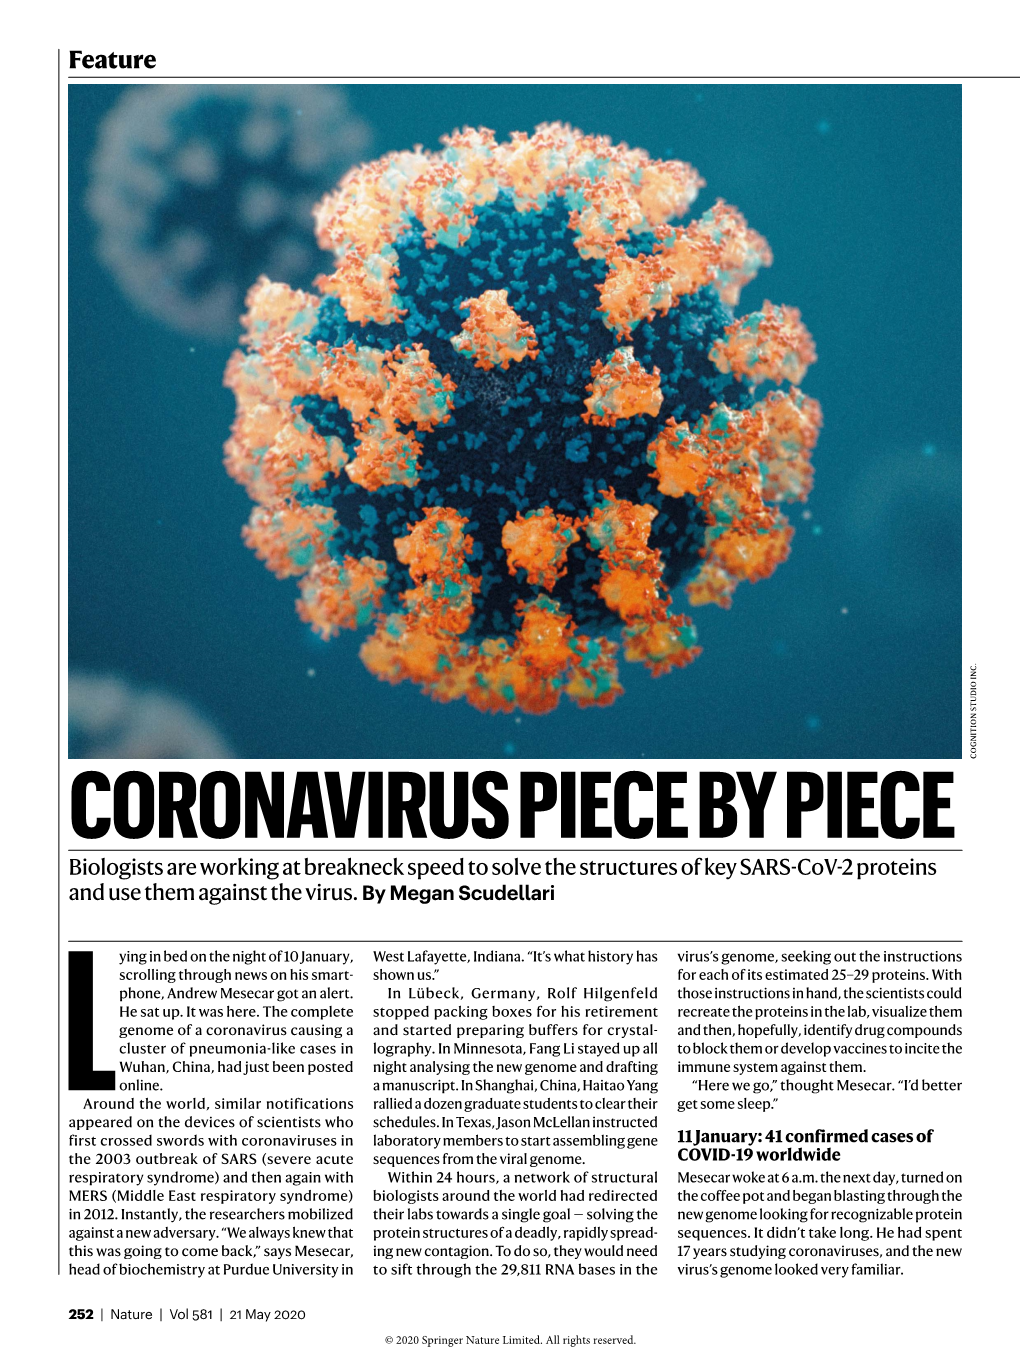 CORONAVIRUS PIECE by PIECE Biologists Are Working at Breakneck Speed to Solve the Structures of Key SARS-Cov-2 Proteins and Use Them Against the Virus